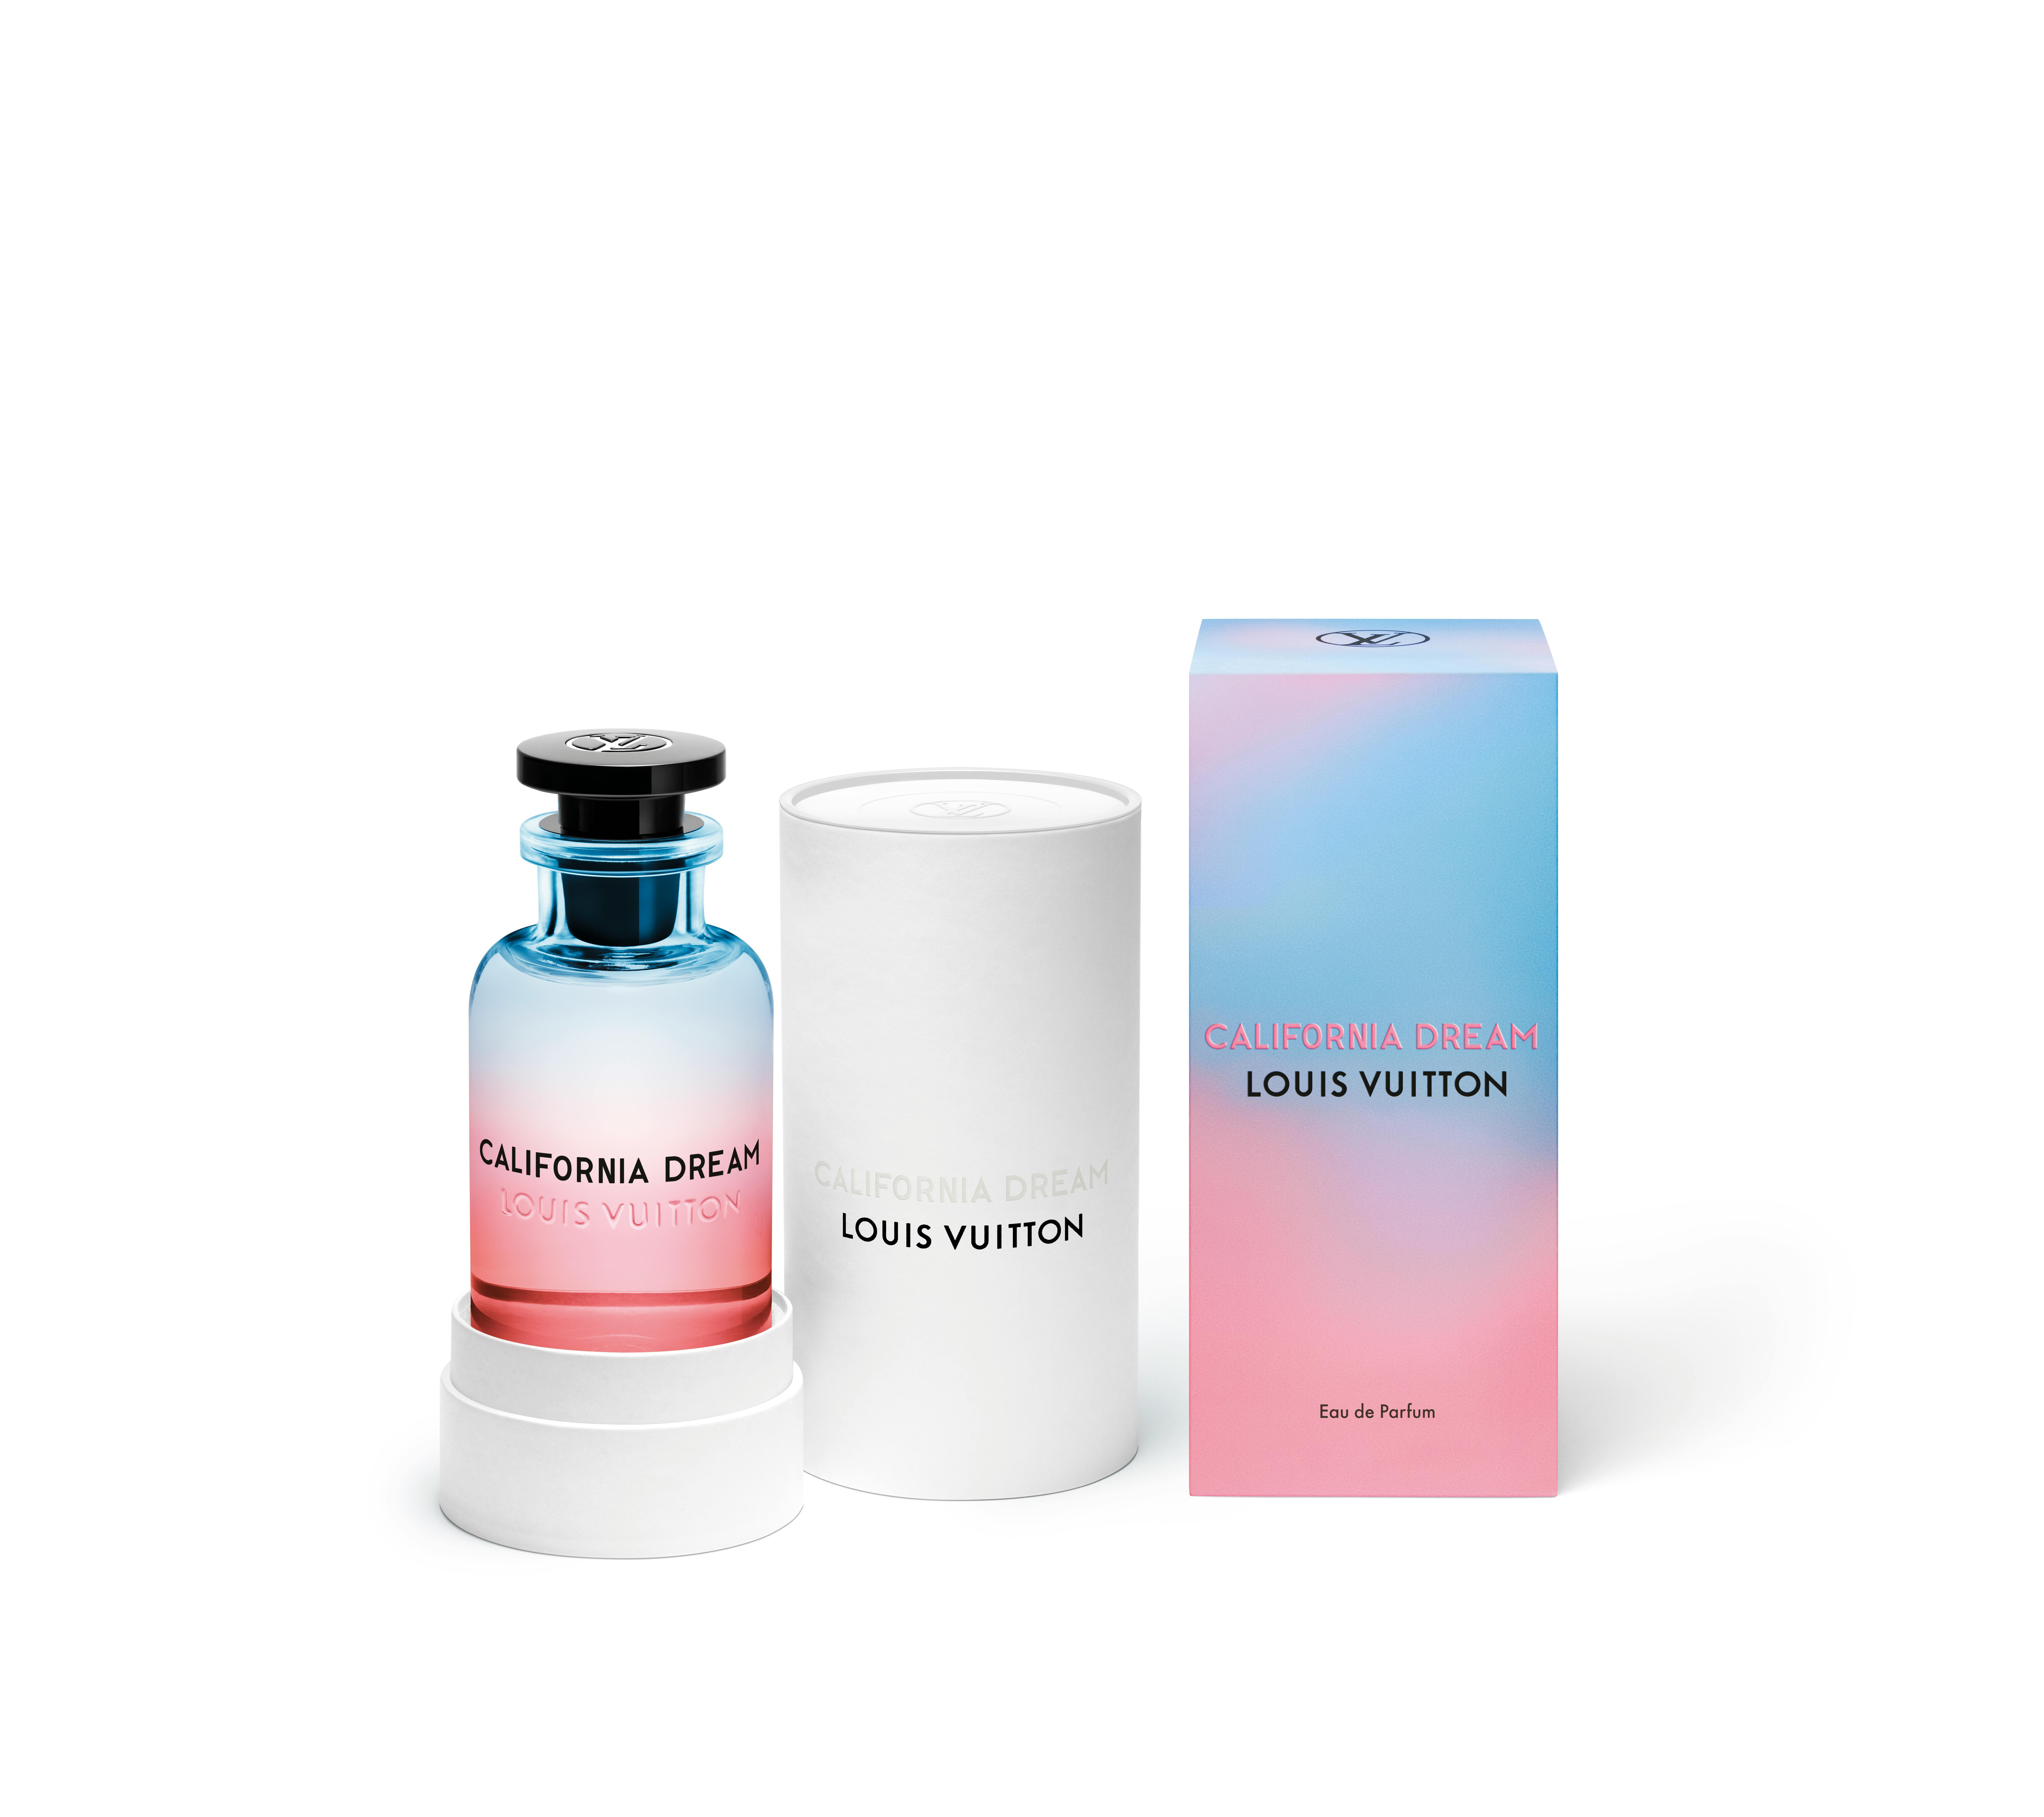 BLUE SKY Inspired By Afternoon Swim LV EDP Unisex Fragrance